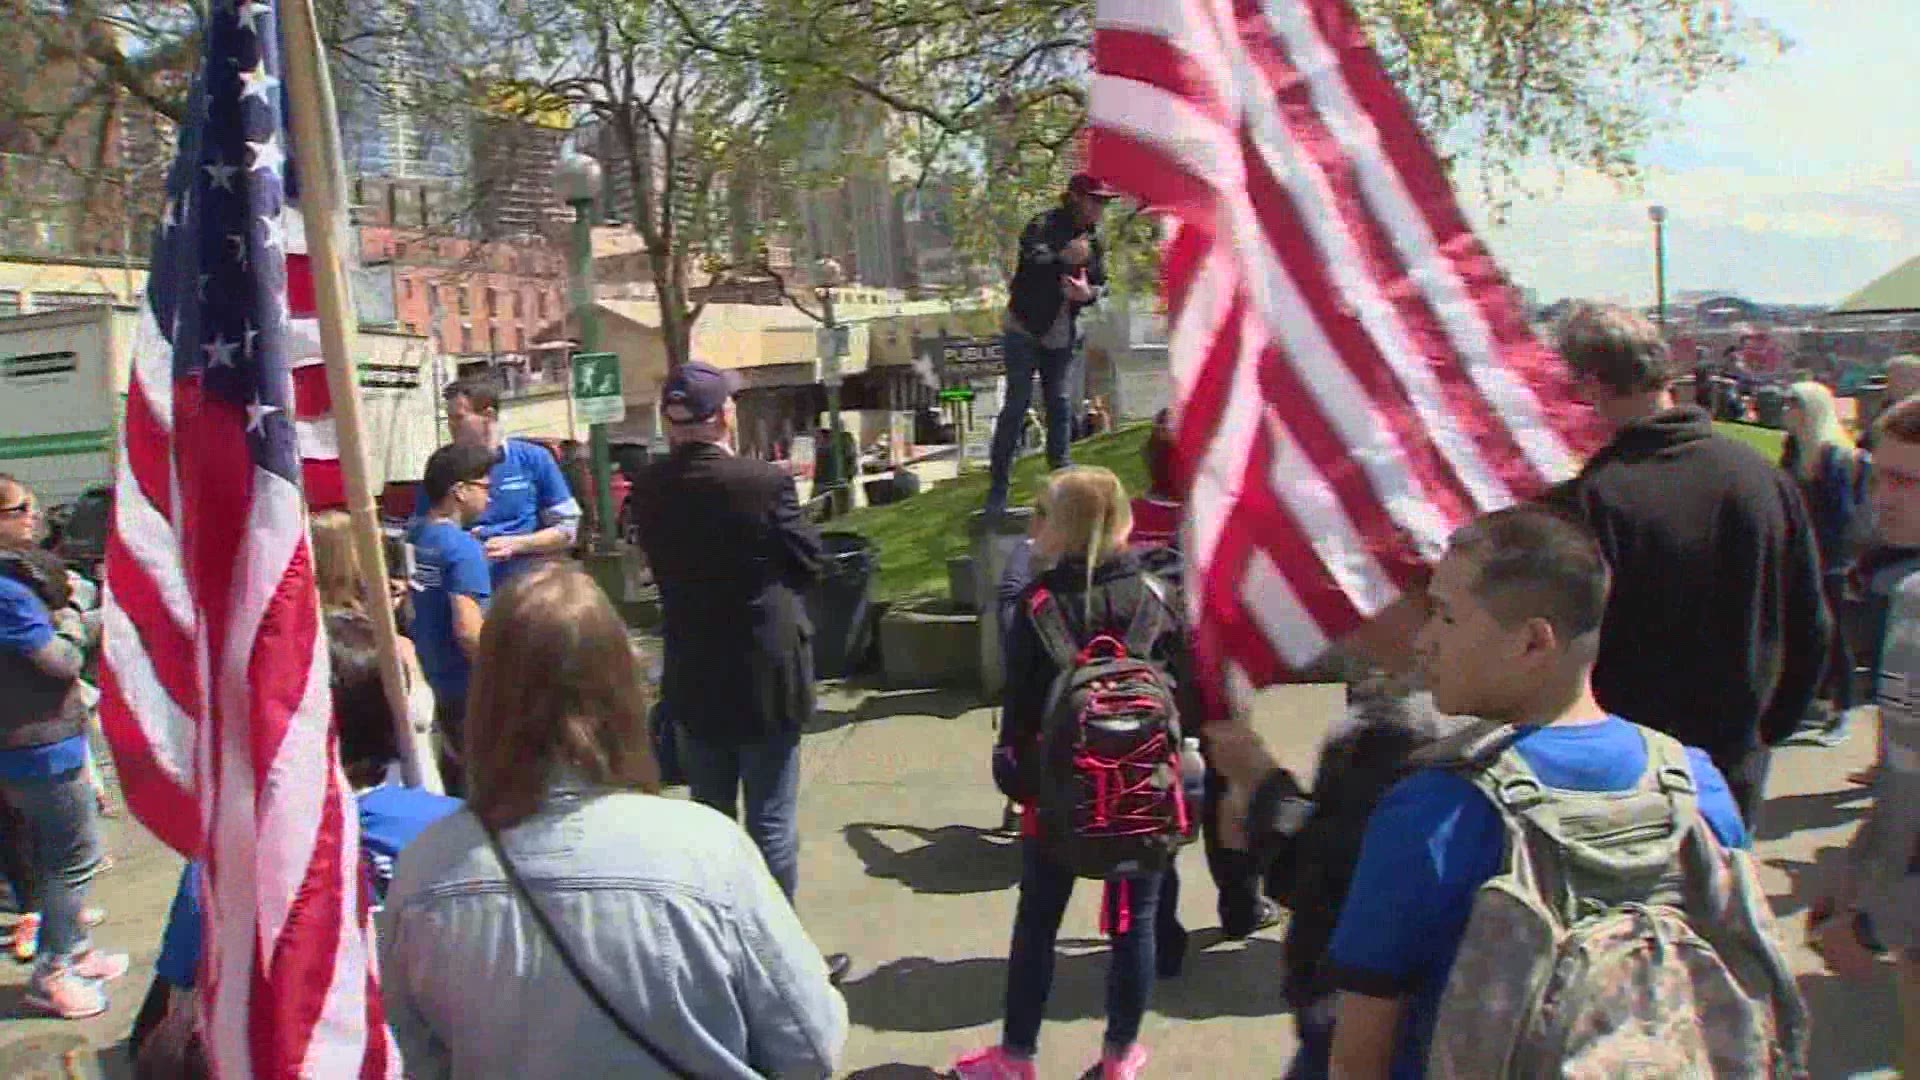 The walk from Seattle to Dallas honors veterans and first responders to remember the true meaning of Memorial Day